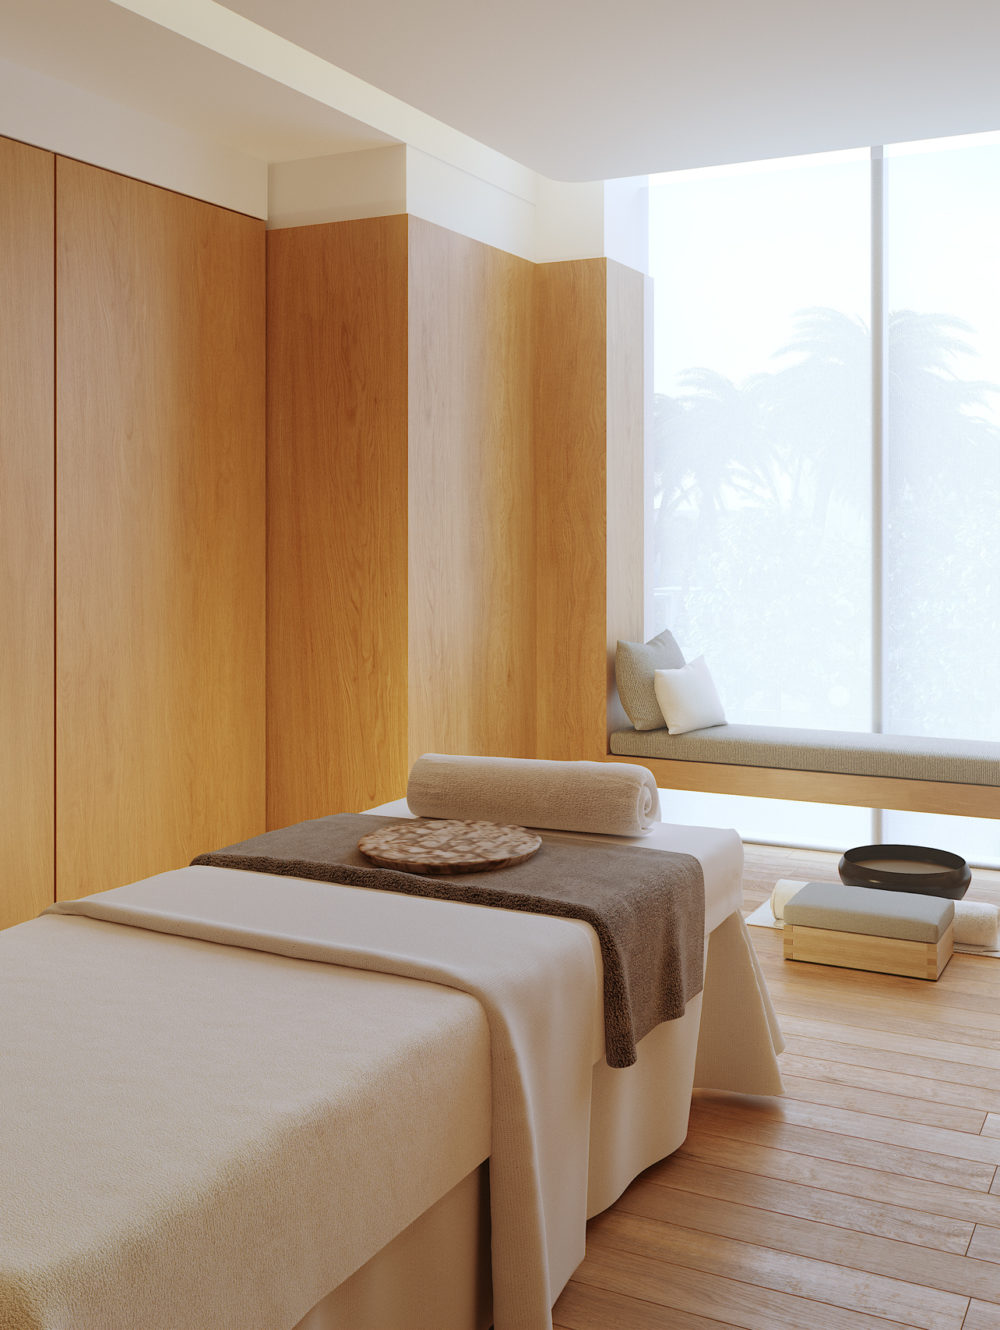 Interior view of Missoni Baia residence spa with window view of ocean. Has a massage table and wood floors and wall.